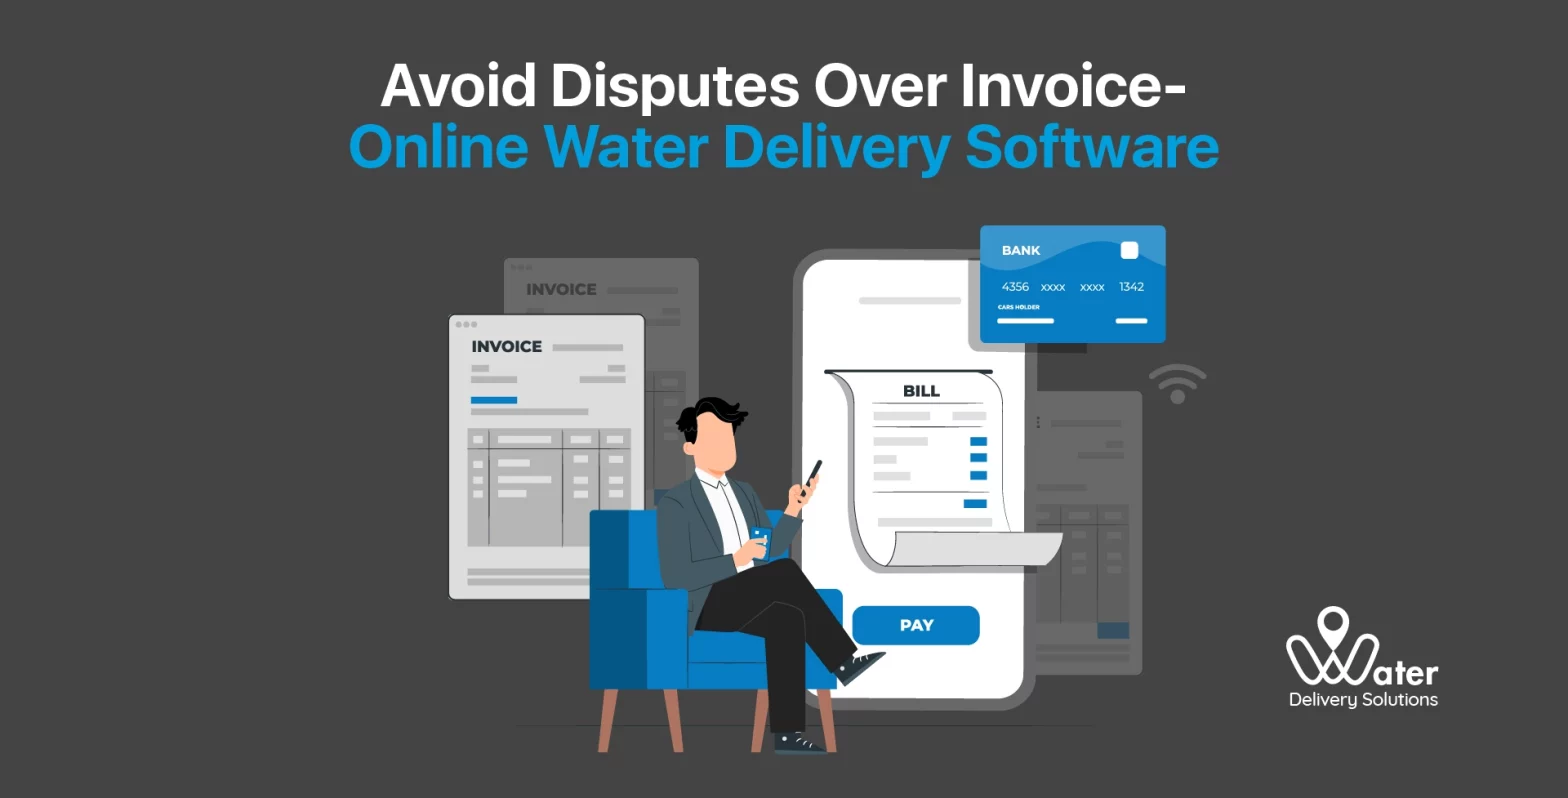 wds-founded-by-ravi-garg-website-insights-avoid-disputes-over-invoice-online-water-delivery-software